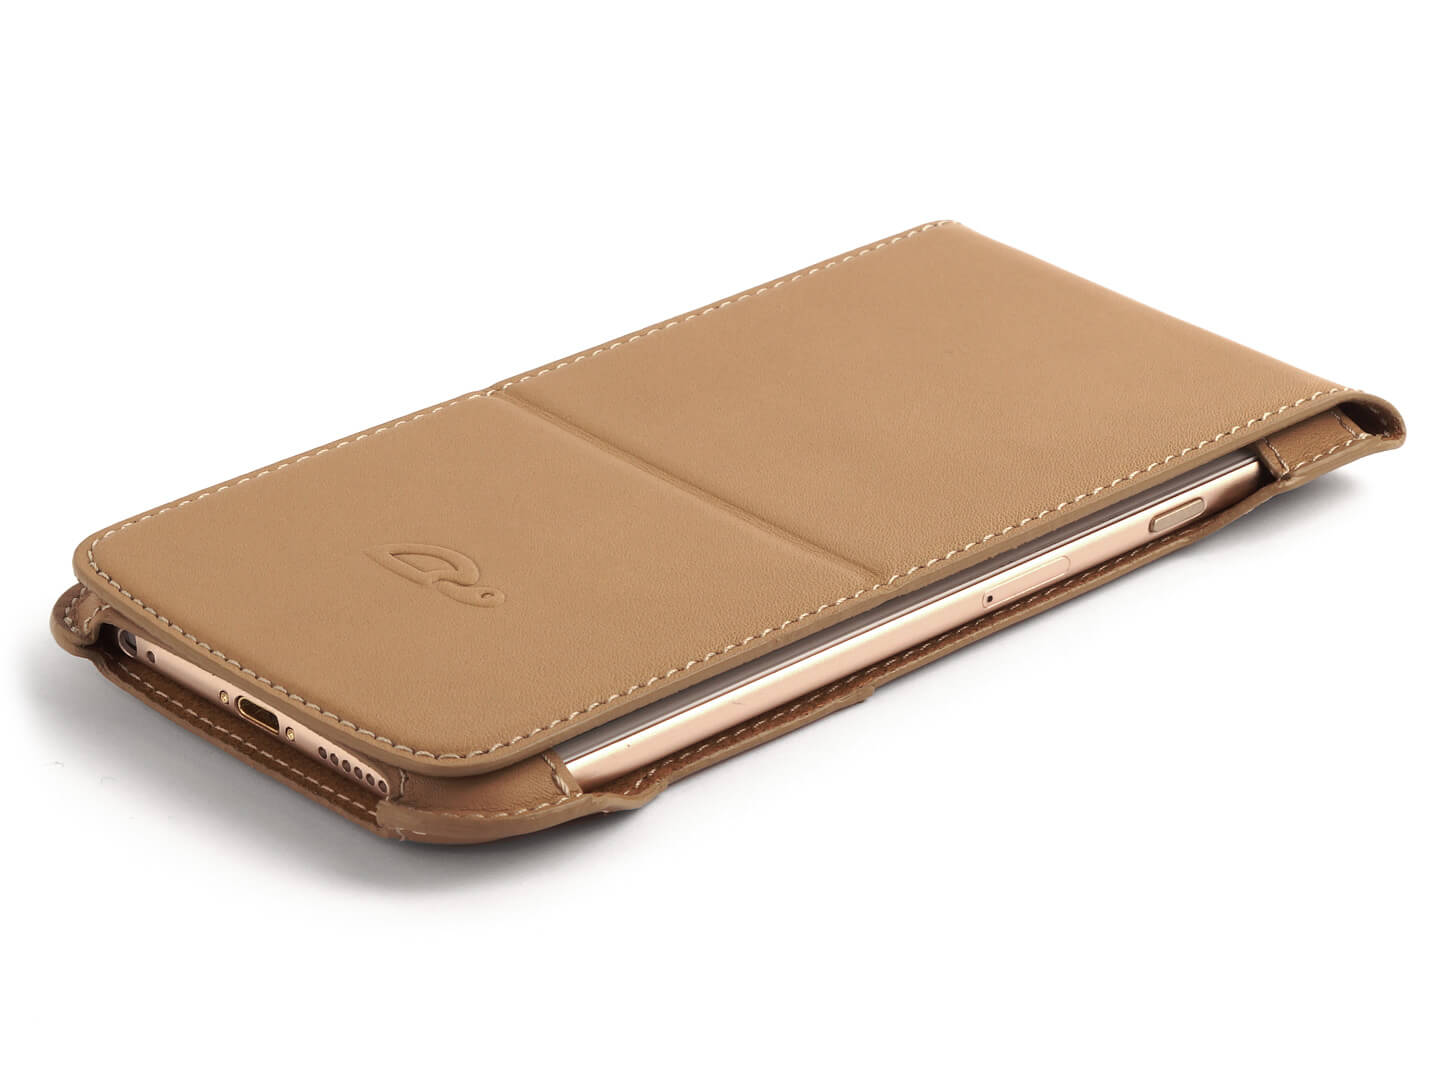 Leather Flip Case iPhone 6 Plus - Stand Function - Card Slot - Perspective - Camel - Carapaz